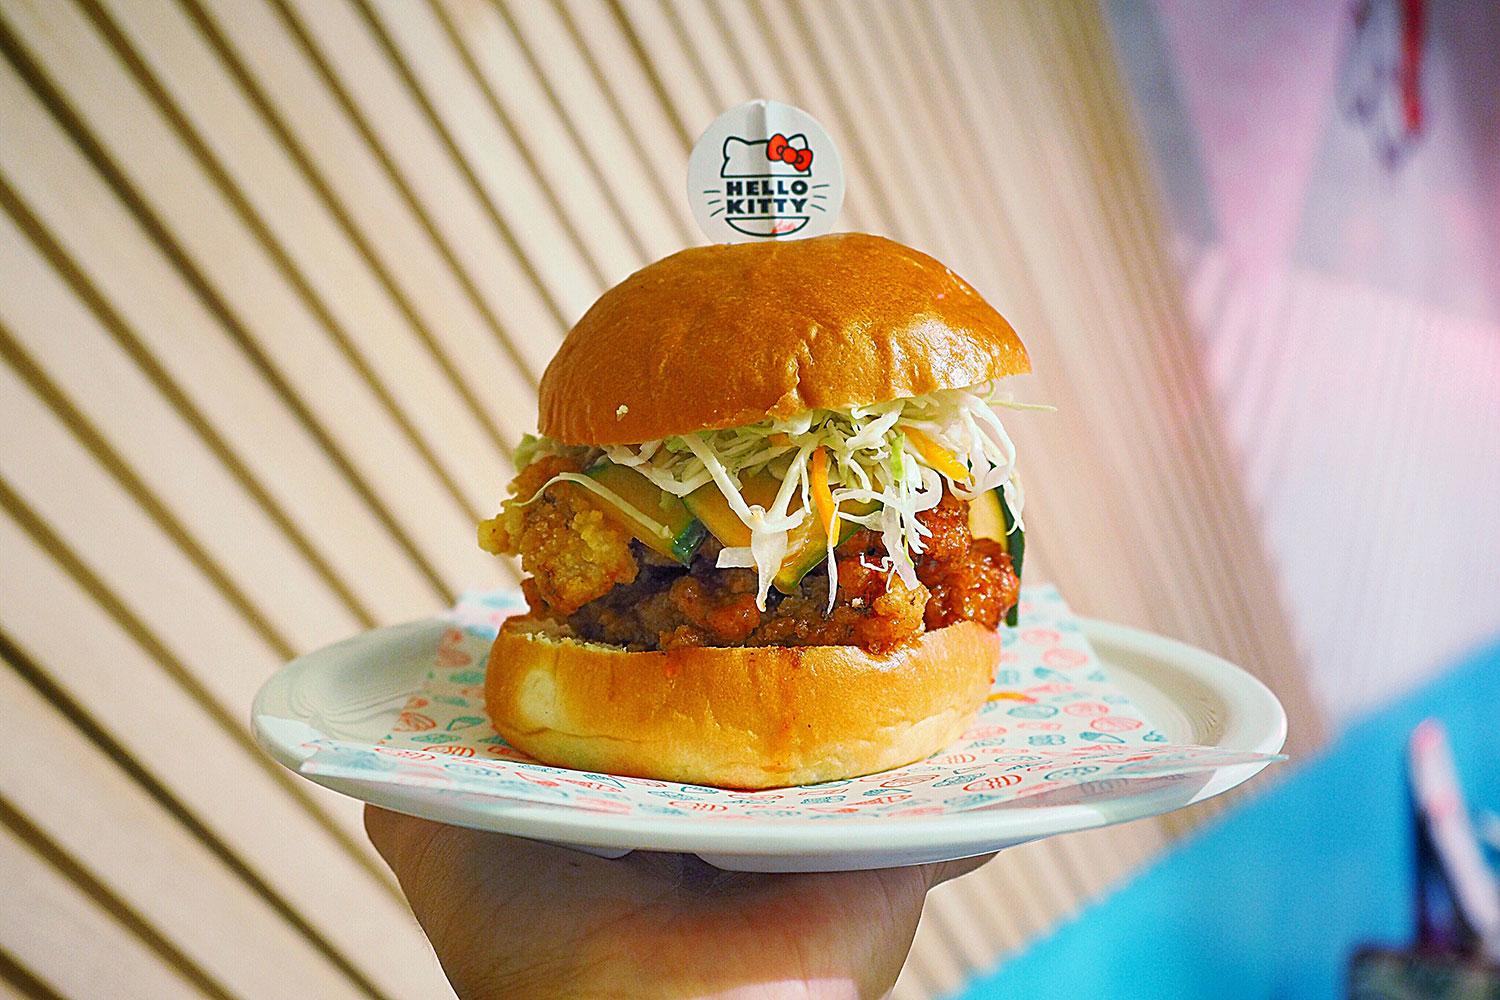 Gee Gee Burger, $12: Hello Kitty Diner, Chatswood. Sydney Food Blog Review